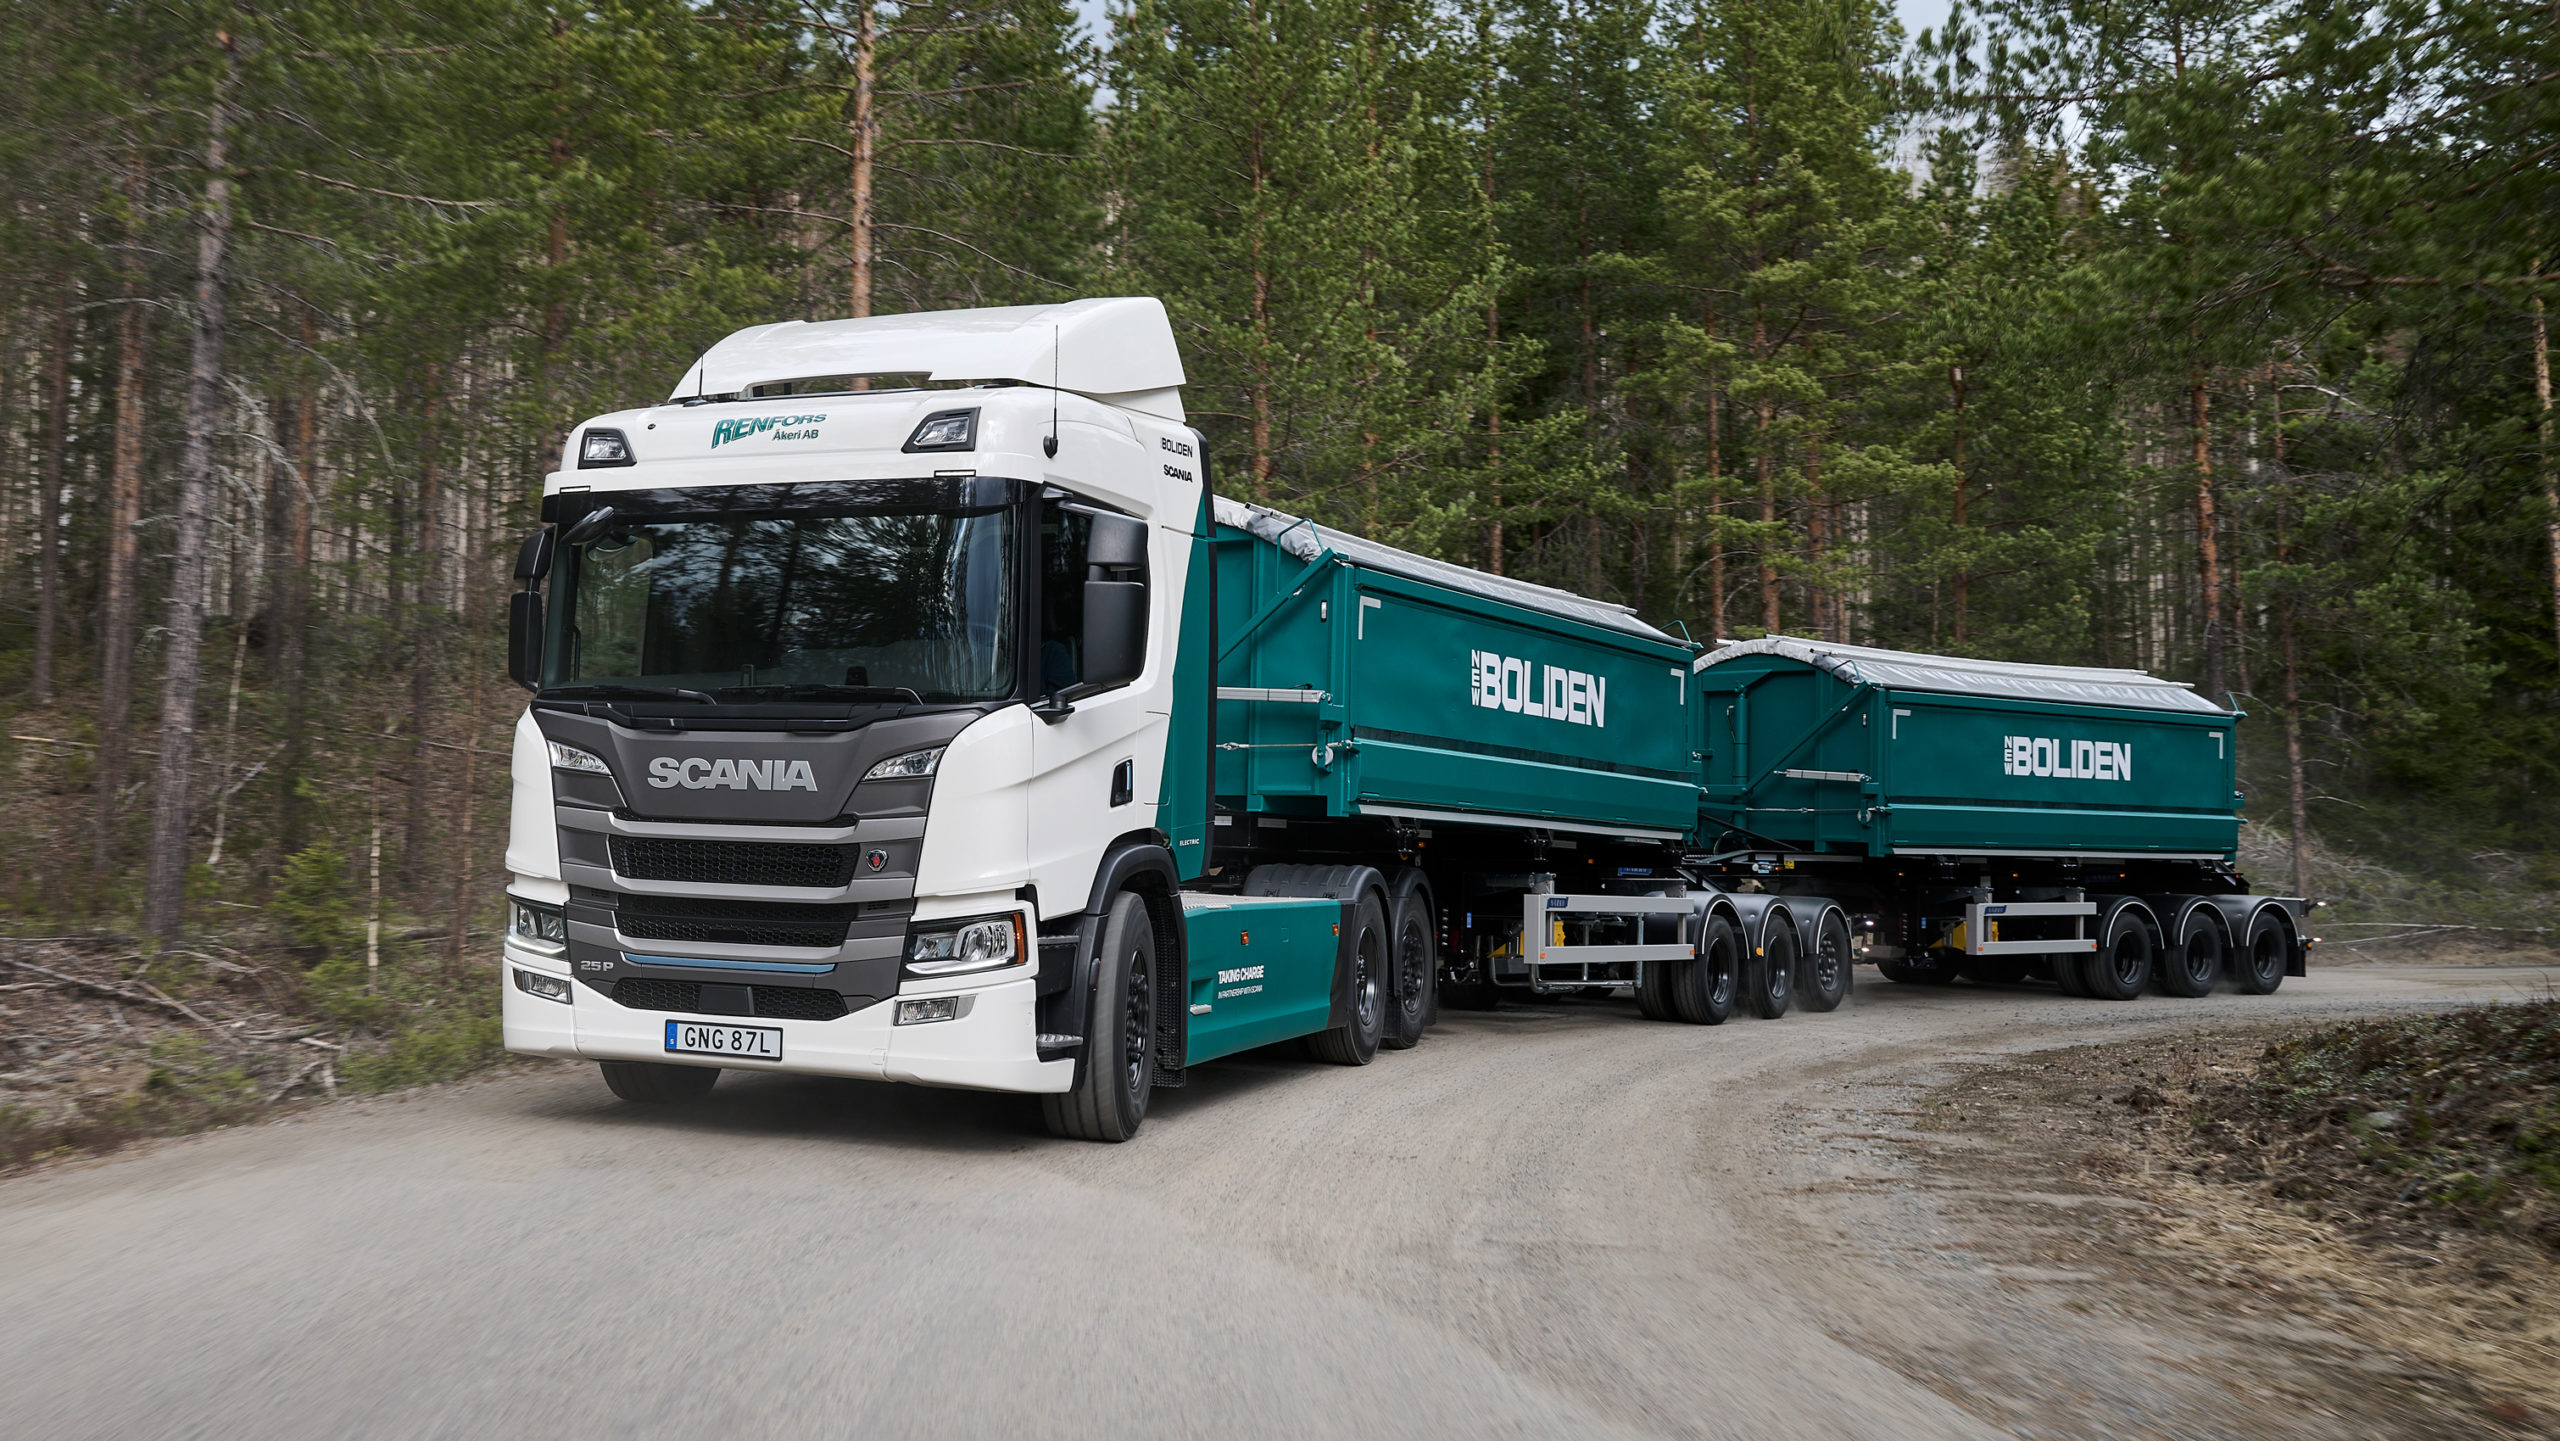 scania bev hgv review: watch out tesla semi, you’ve got competition